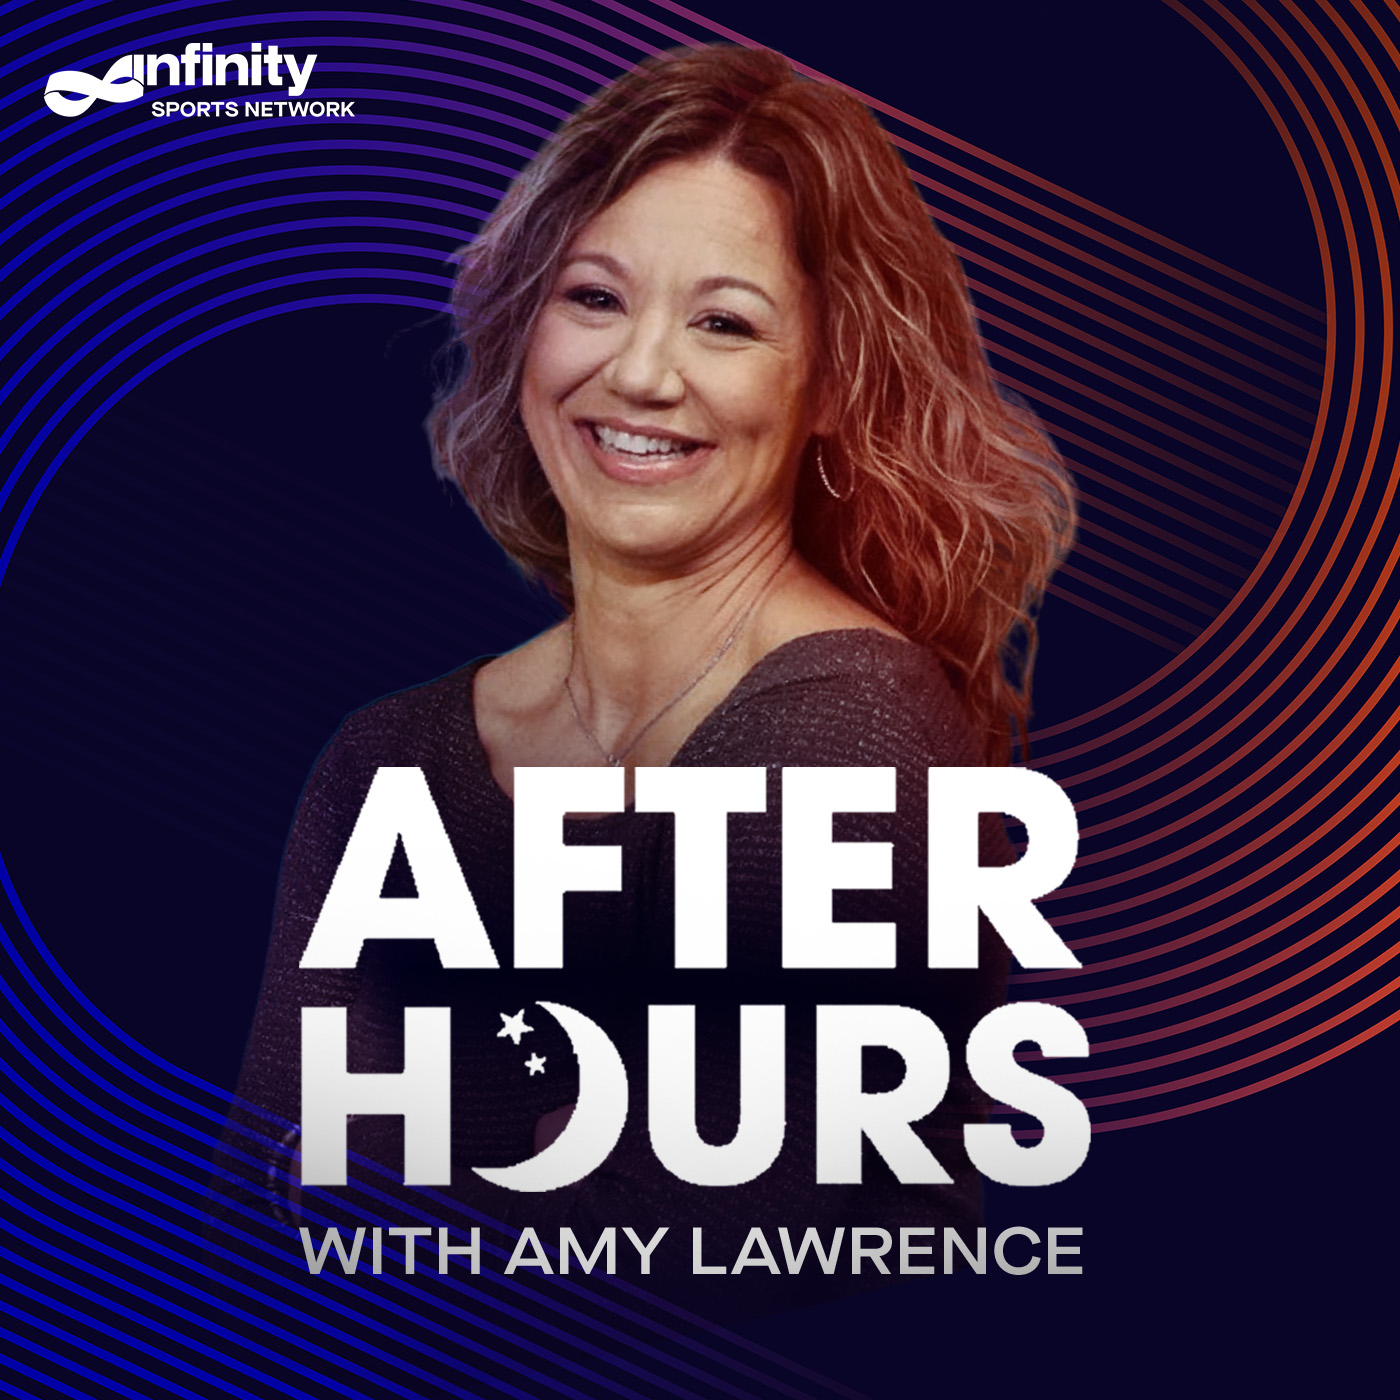 4-5-22 After Hours with Amy Lawrence PODCAST: Hour 2